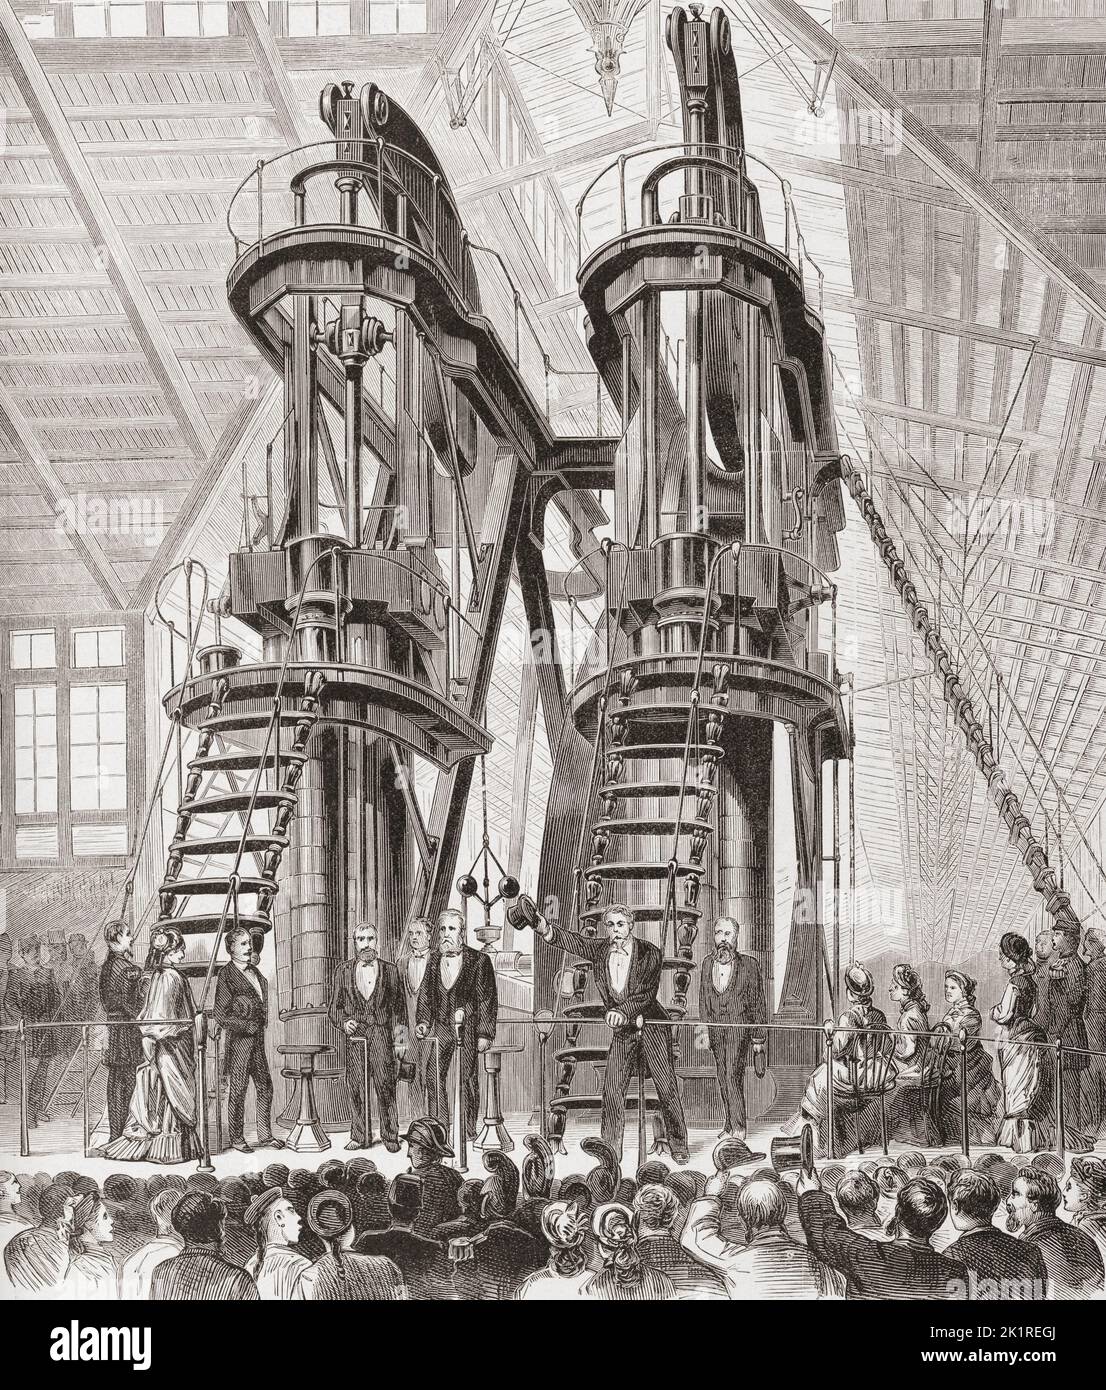 The rotative beam engine known as the Corliss Centennial Engine which supplied power to most of the exhibits at the Centennial Exposition in Philadelphia in 1876.   After an illustration in Frank Leslie's historical register of the United States Centennial exposition, 1876 Stock Photo